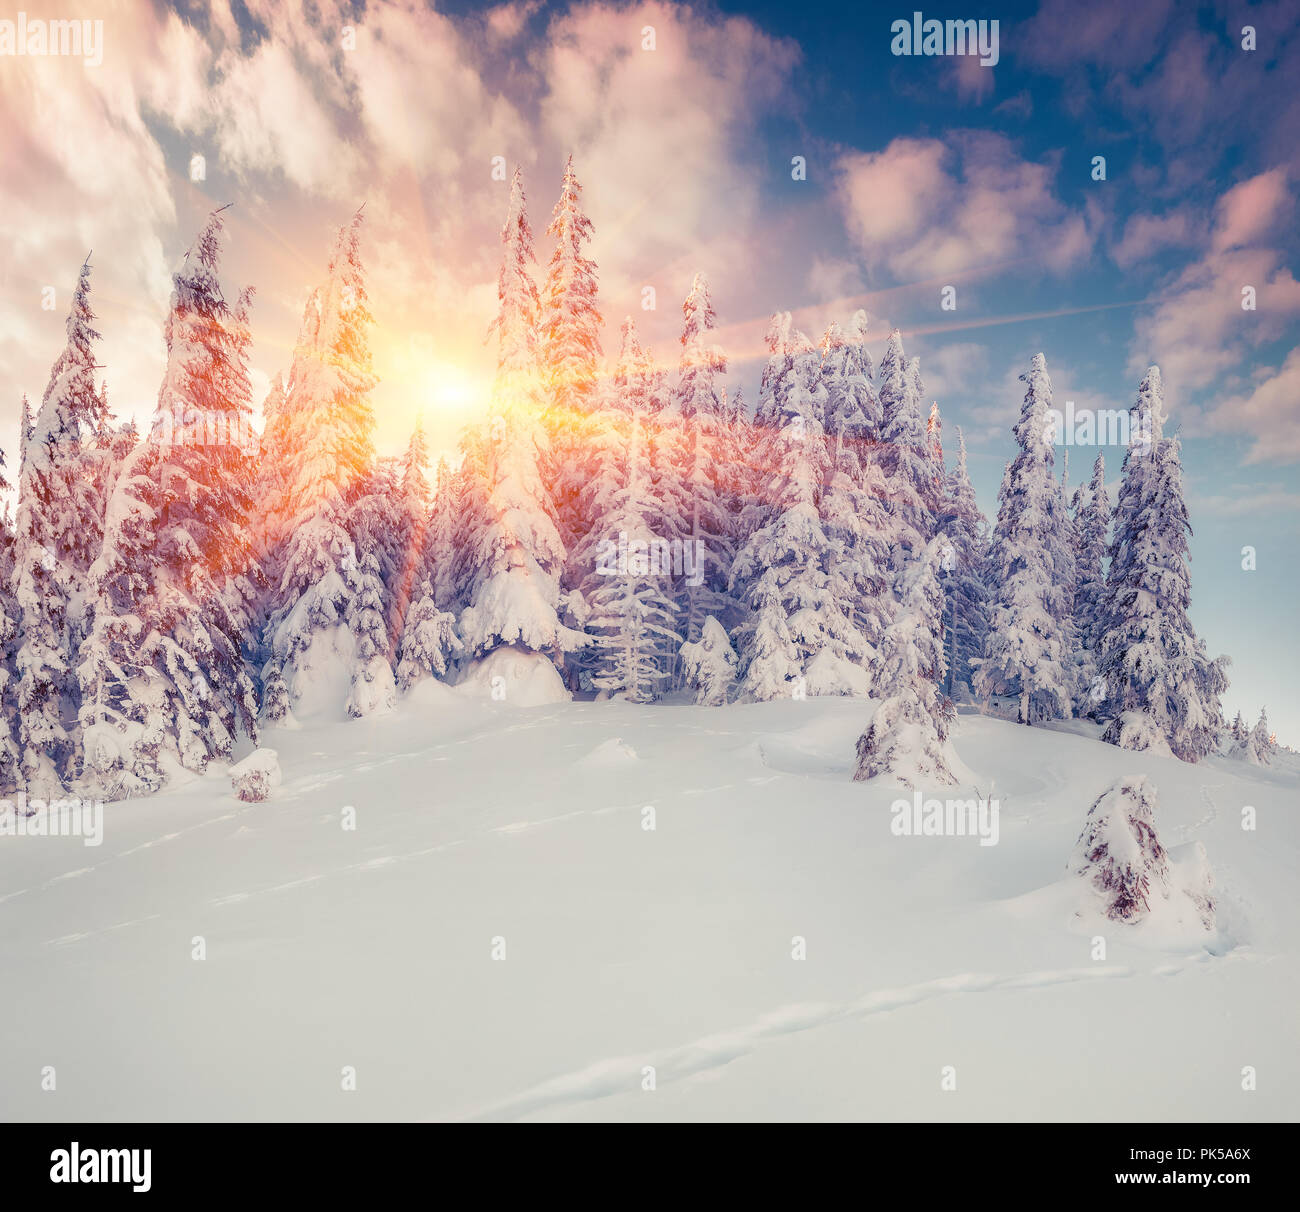 Colorful winter sunrise in the snowy mountain forest. Stock Photo